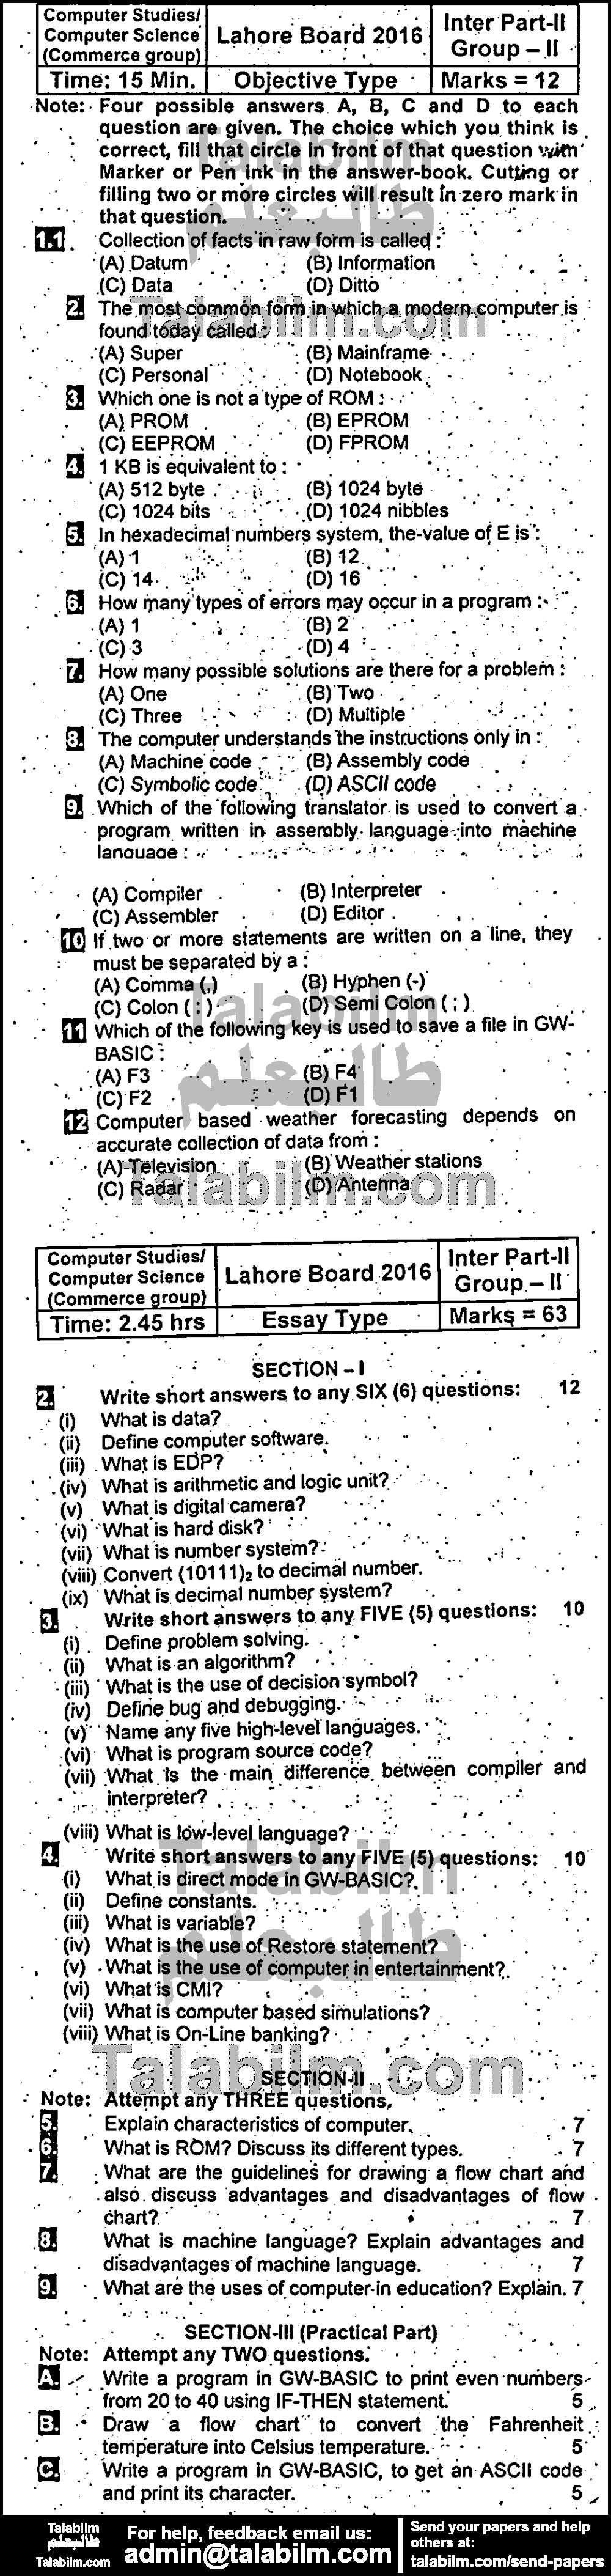 Computer Science 0 past paper for Group-II 2016